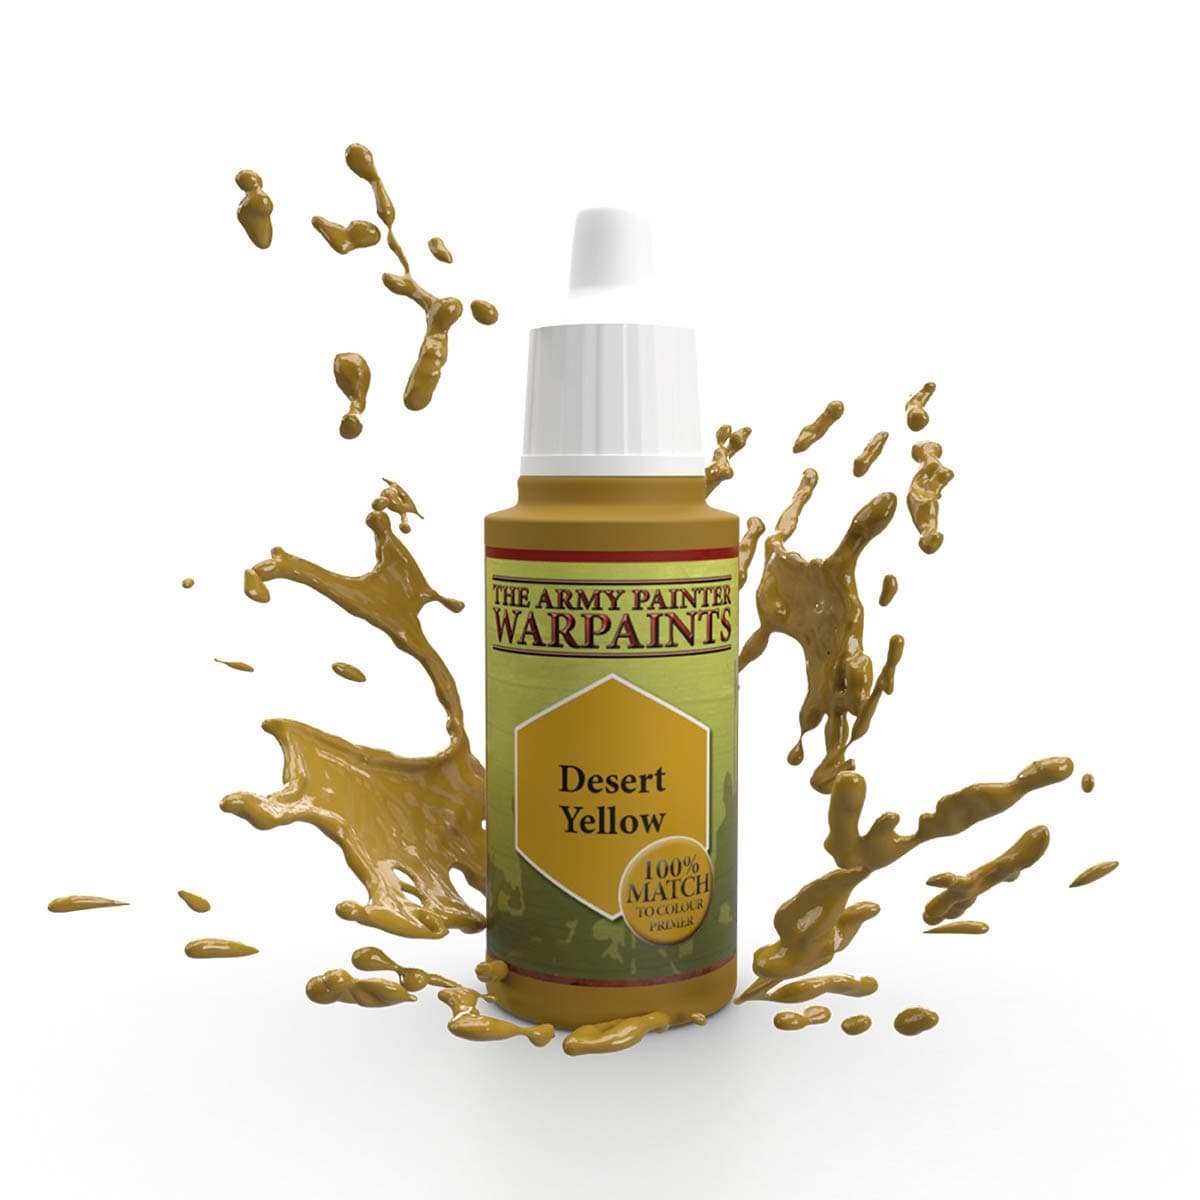 The Army Painter Accessories The Army Painter Warpaints: Desert Yellow 18ml